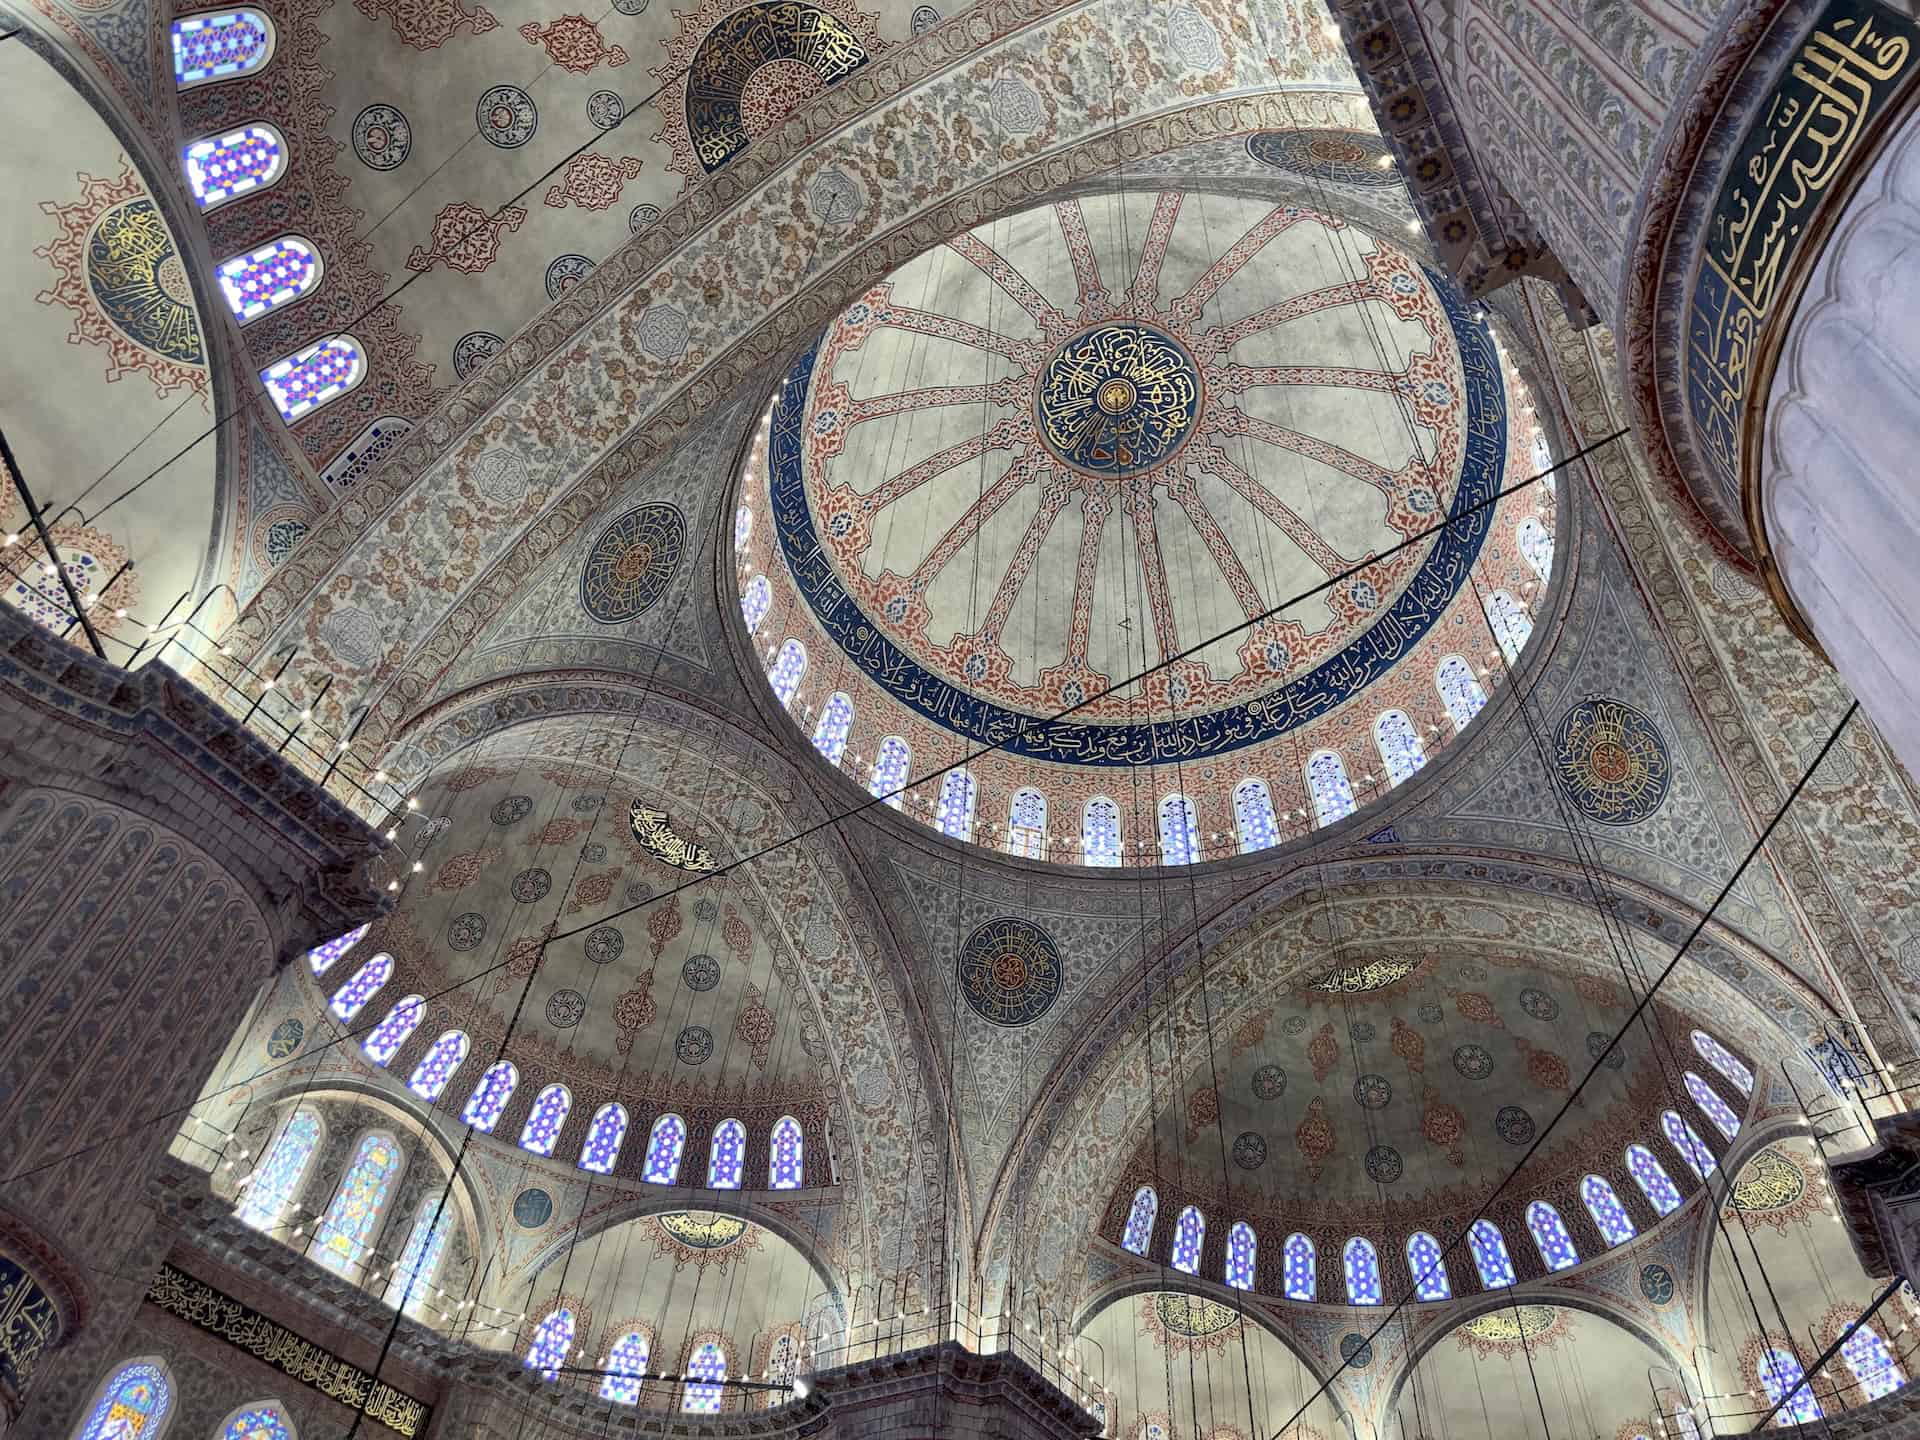 Domes of the Blue Mosque in Istanbul, Turkey